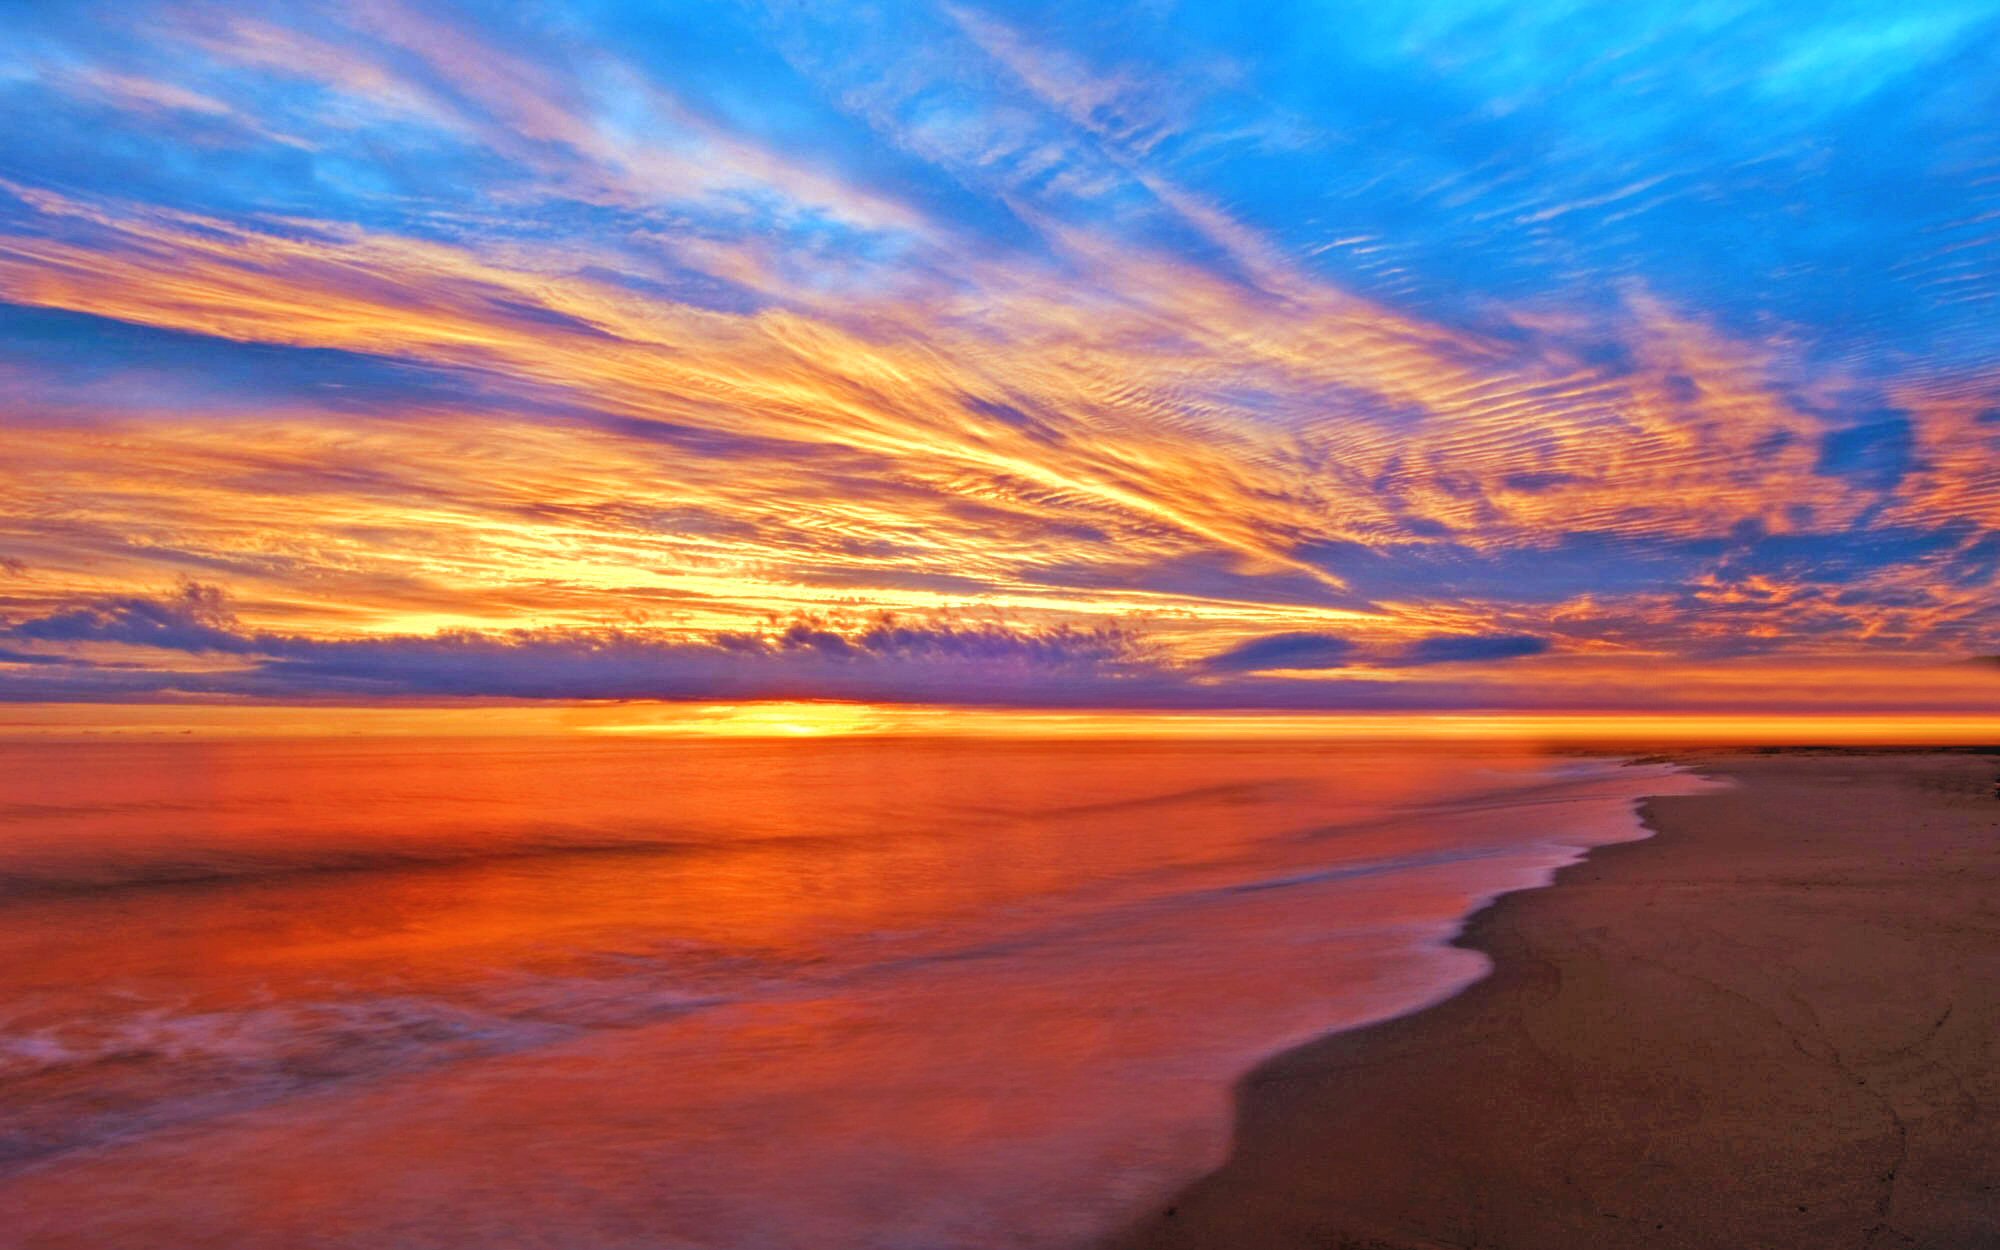 30+ HD Sunset Wallpapers, Backgrounds, Images | Design ...